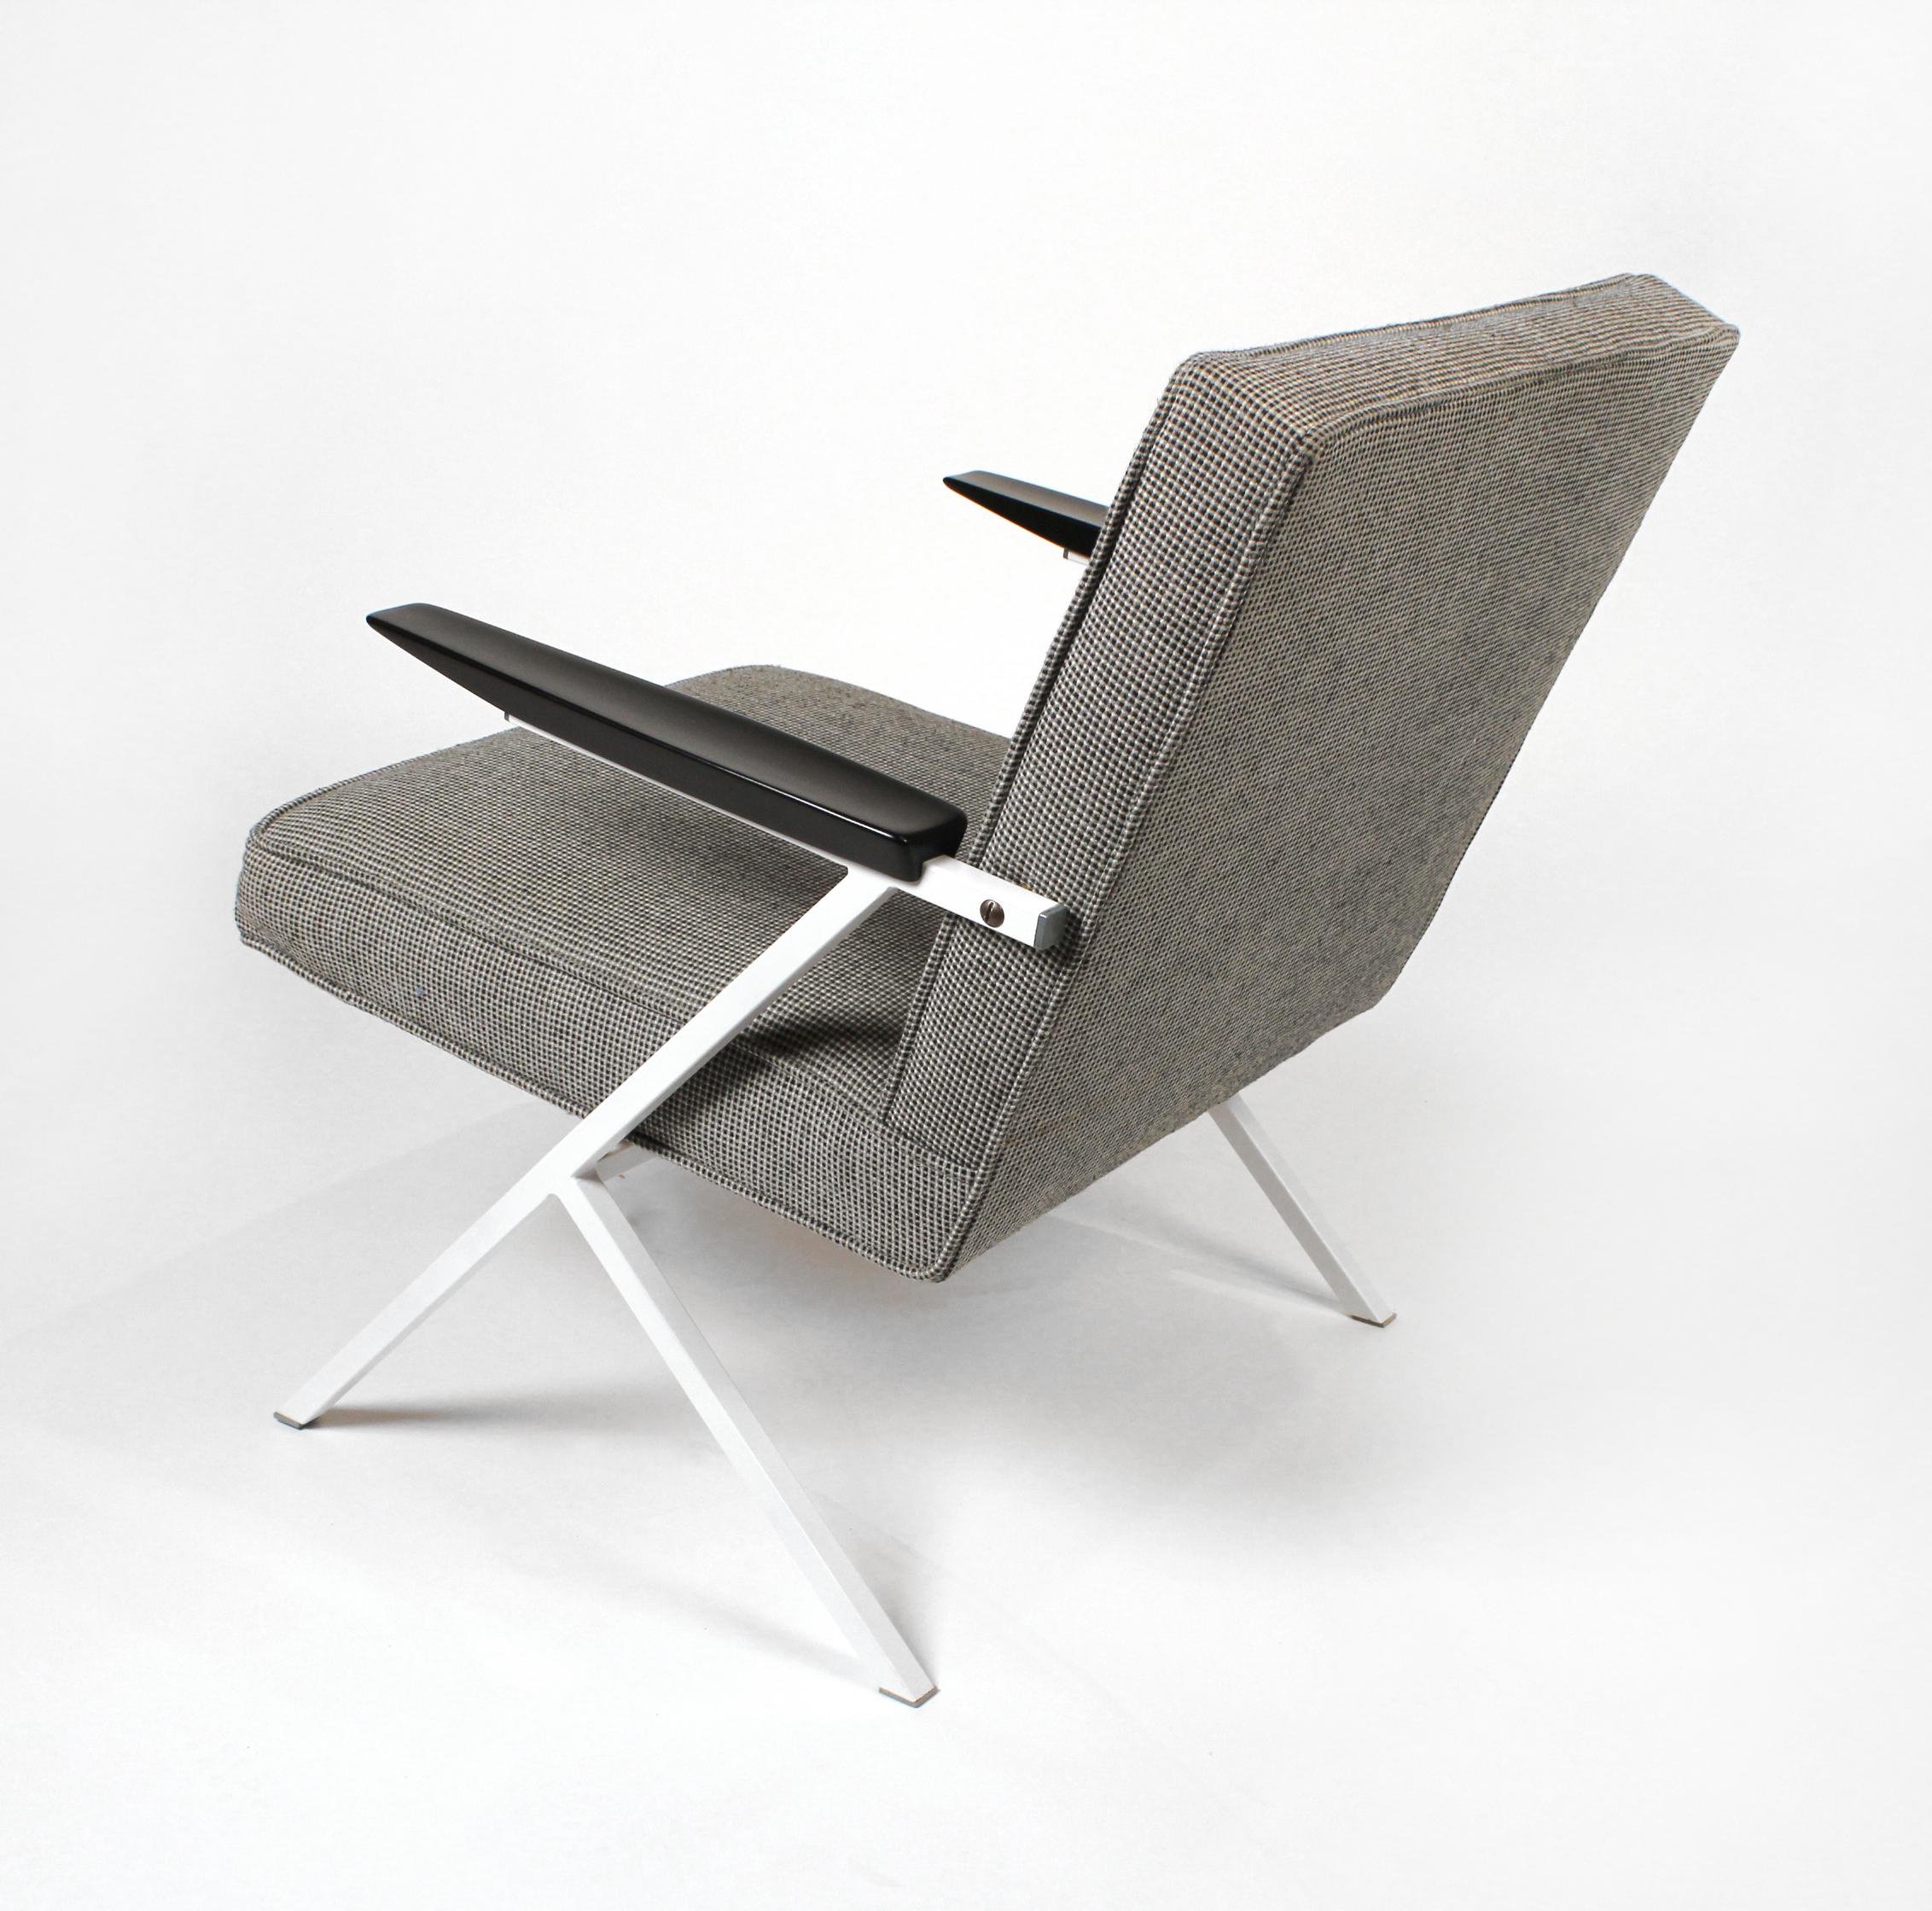 Ladislav Rado Cantilevered Lounge Chairs for Knoll and Drake, 1950s For Sale 1